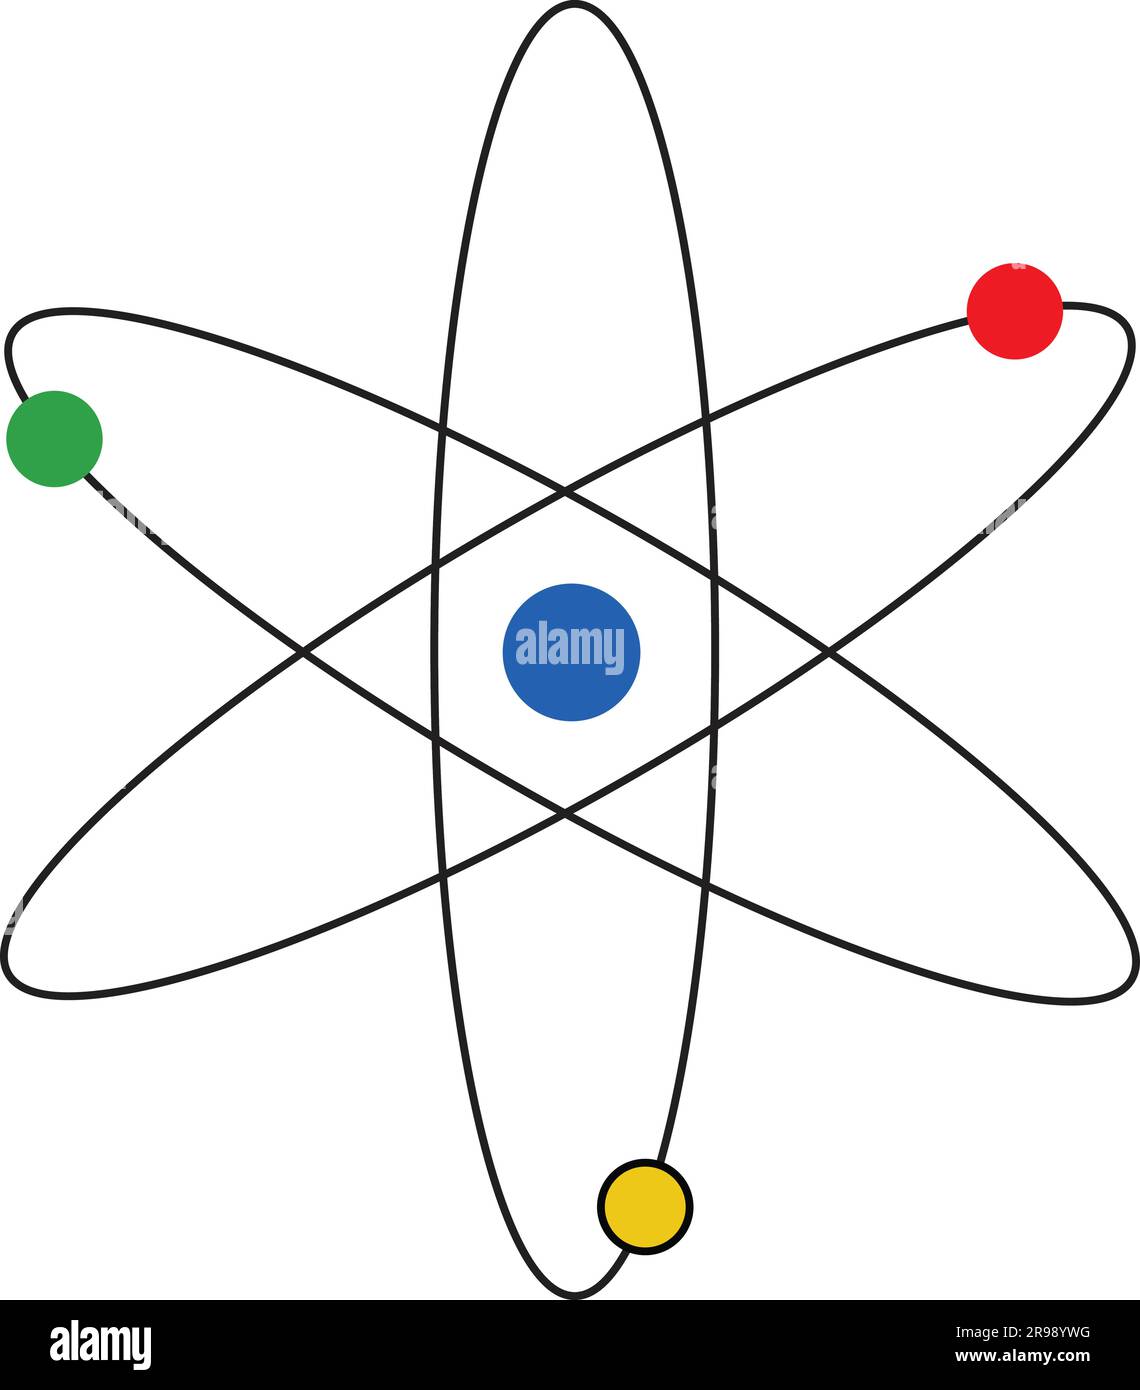 Atom vector with nucleus of protons and neutrons Stock Vector Image ...